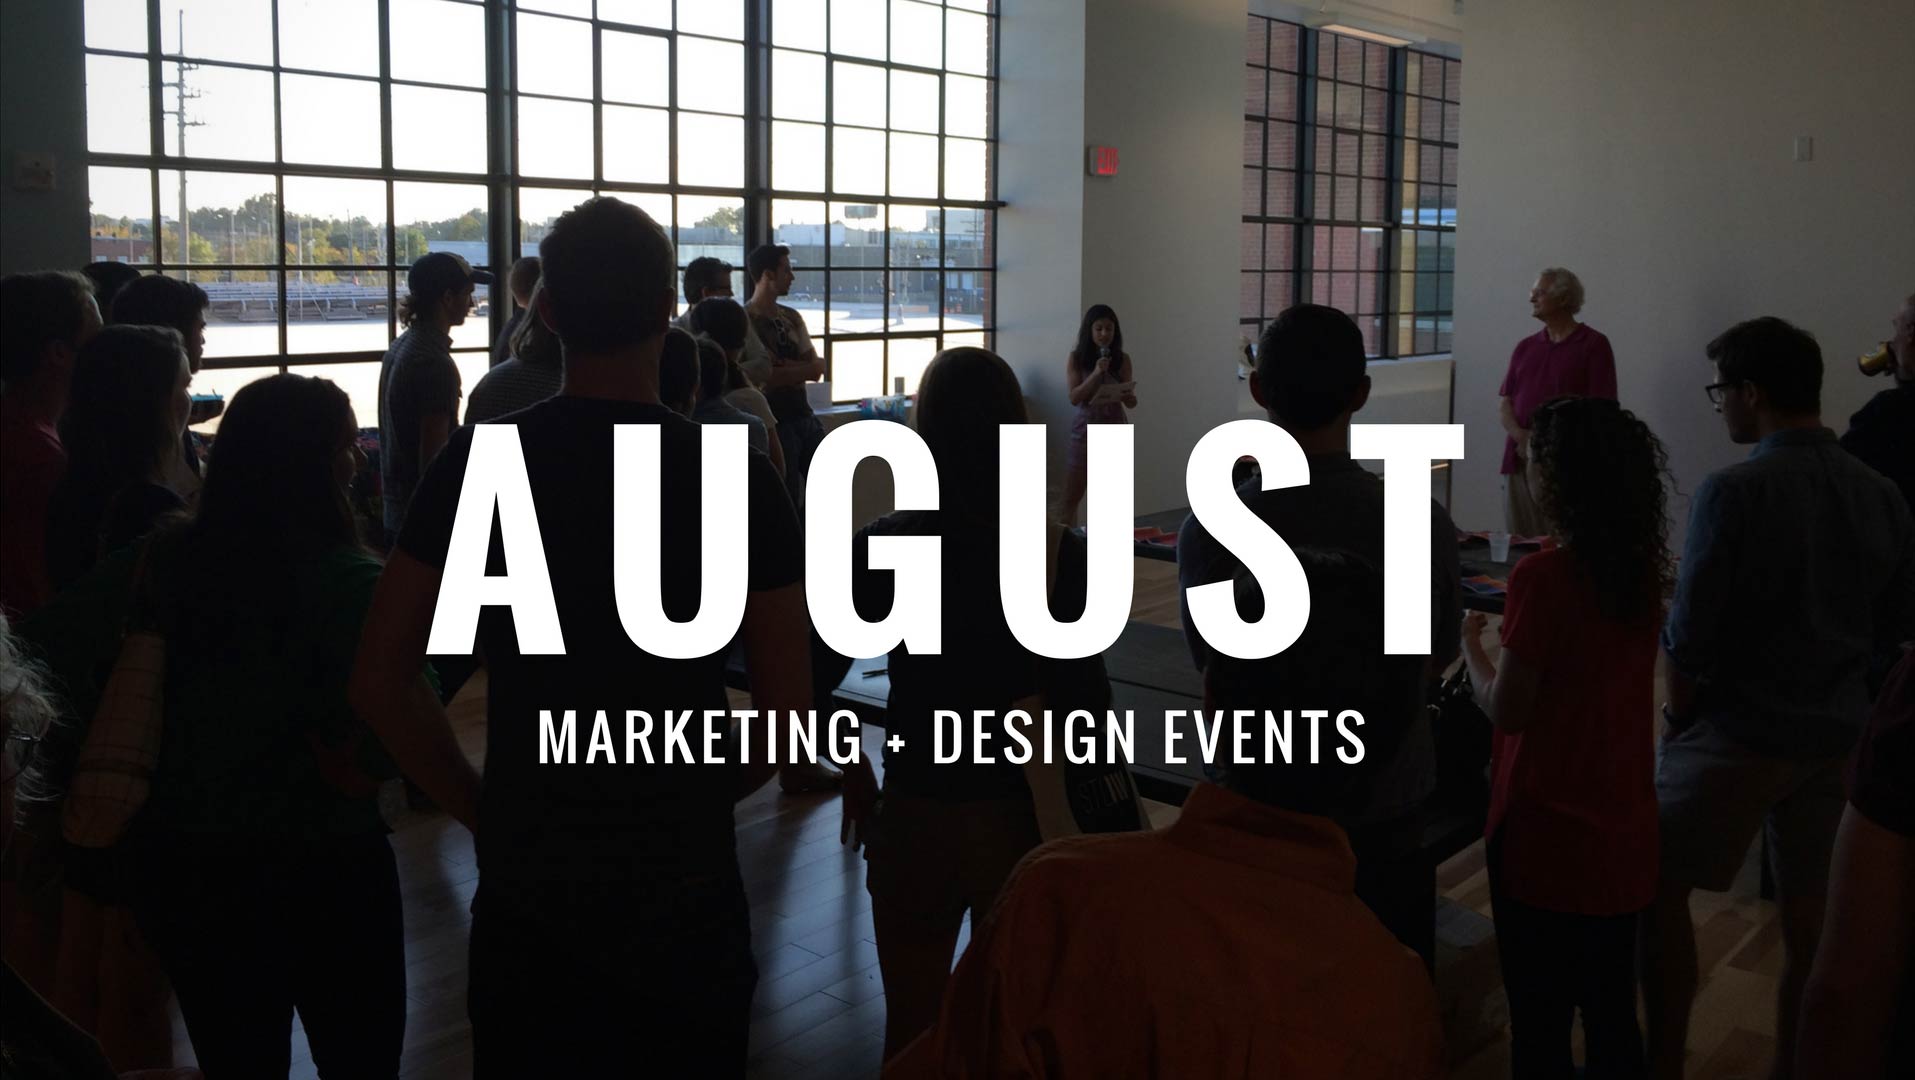 August 2017 Marketing design events in St. Louis